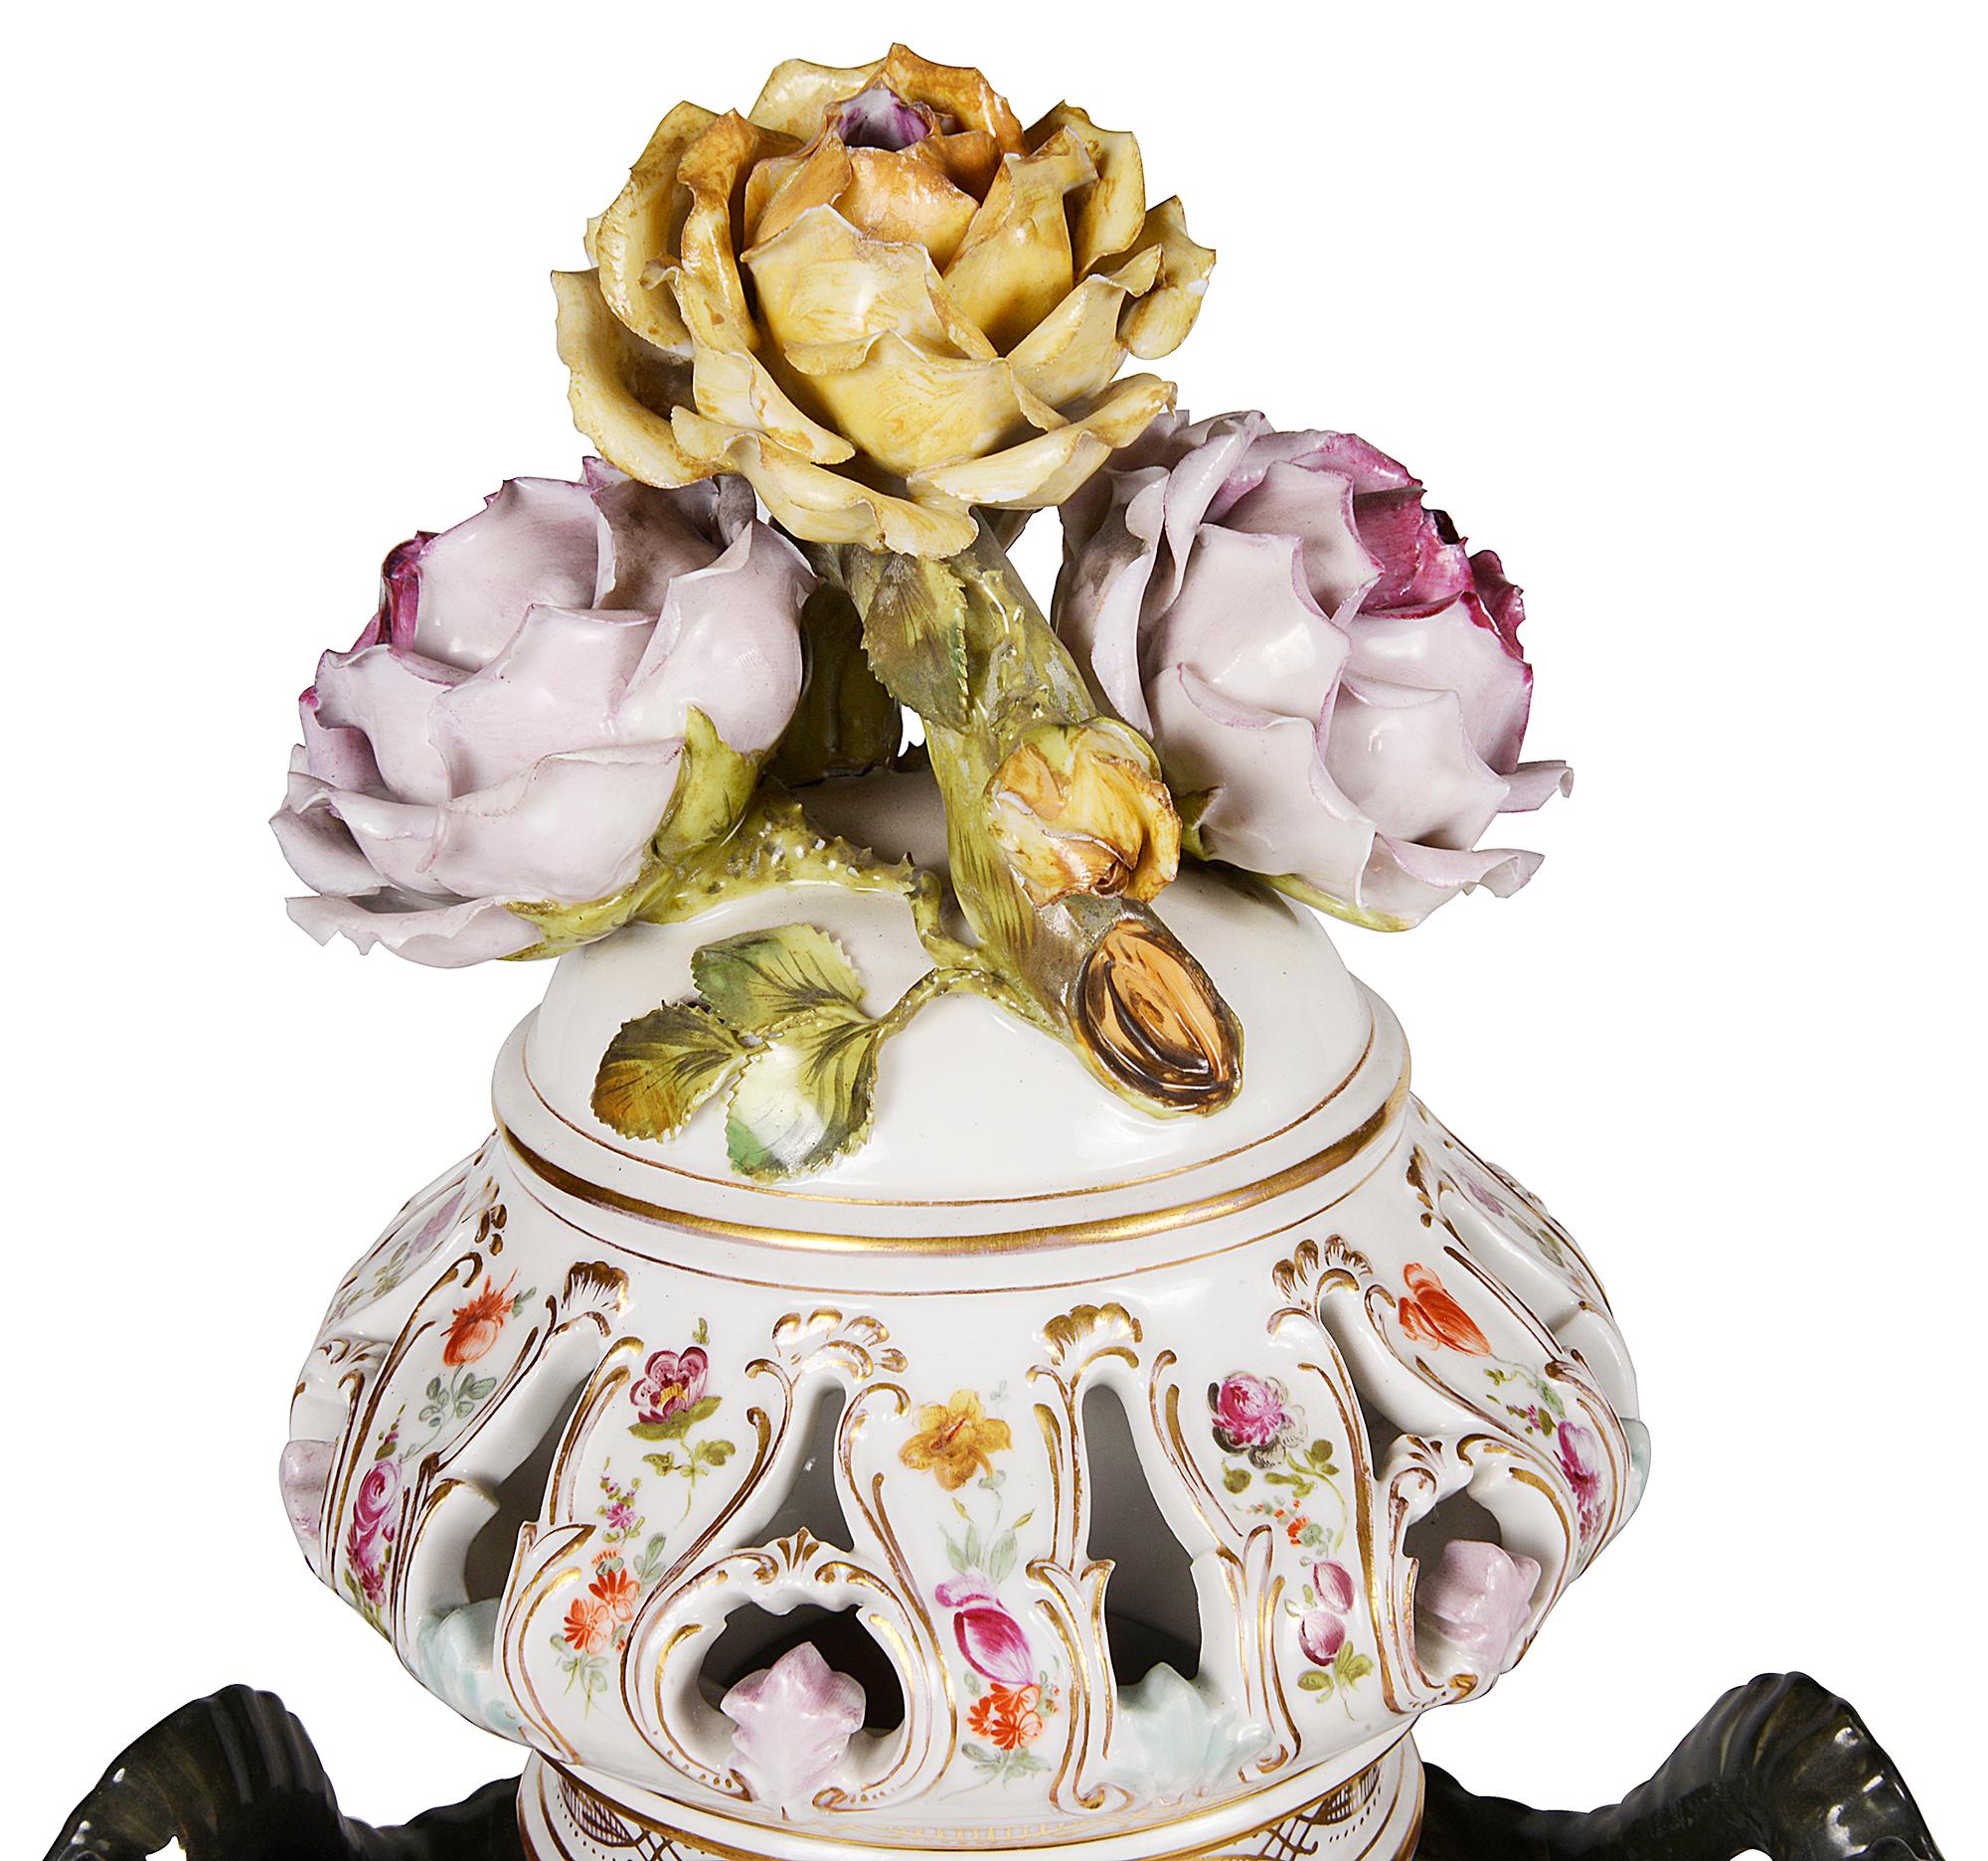 A very impressive and decorative pair of Meissen style lidded porcelain vases. Each with floral encrusted decoration to the pierced lids, Rams head handles to either side, classical romantic hand painted scenes and raised on pedestal bases.